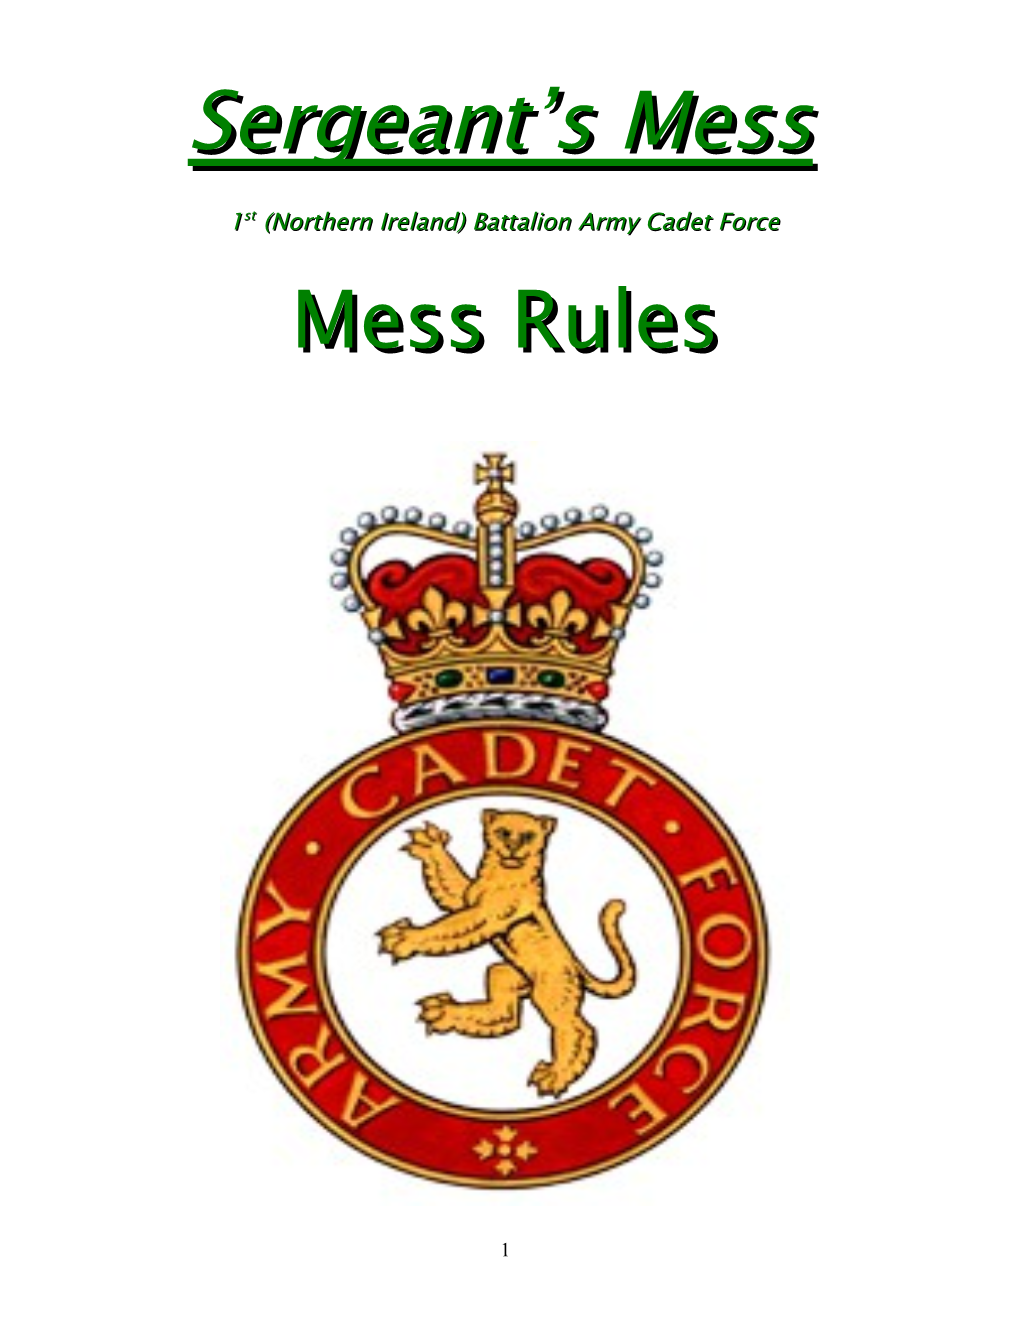 Rules for the Warrant Officers and Sergeants Mess